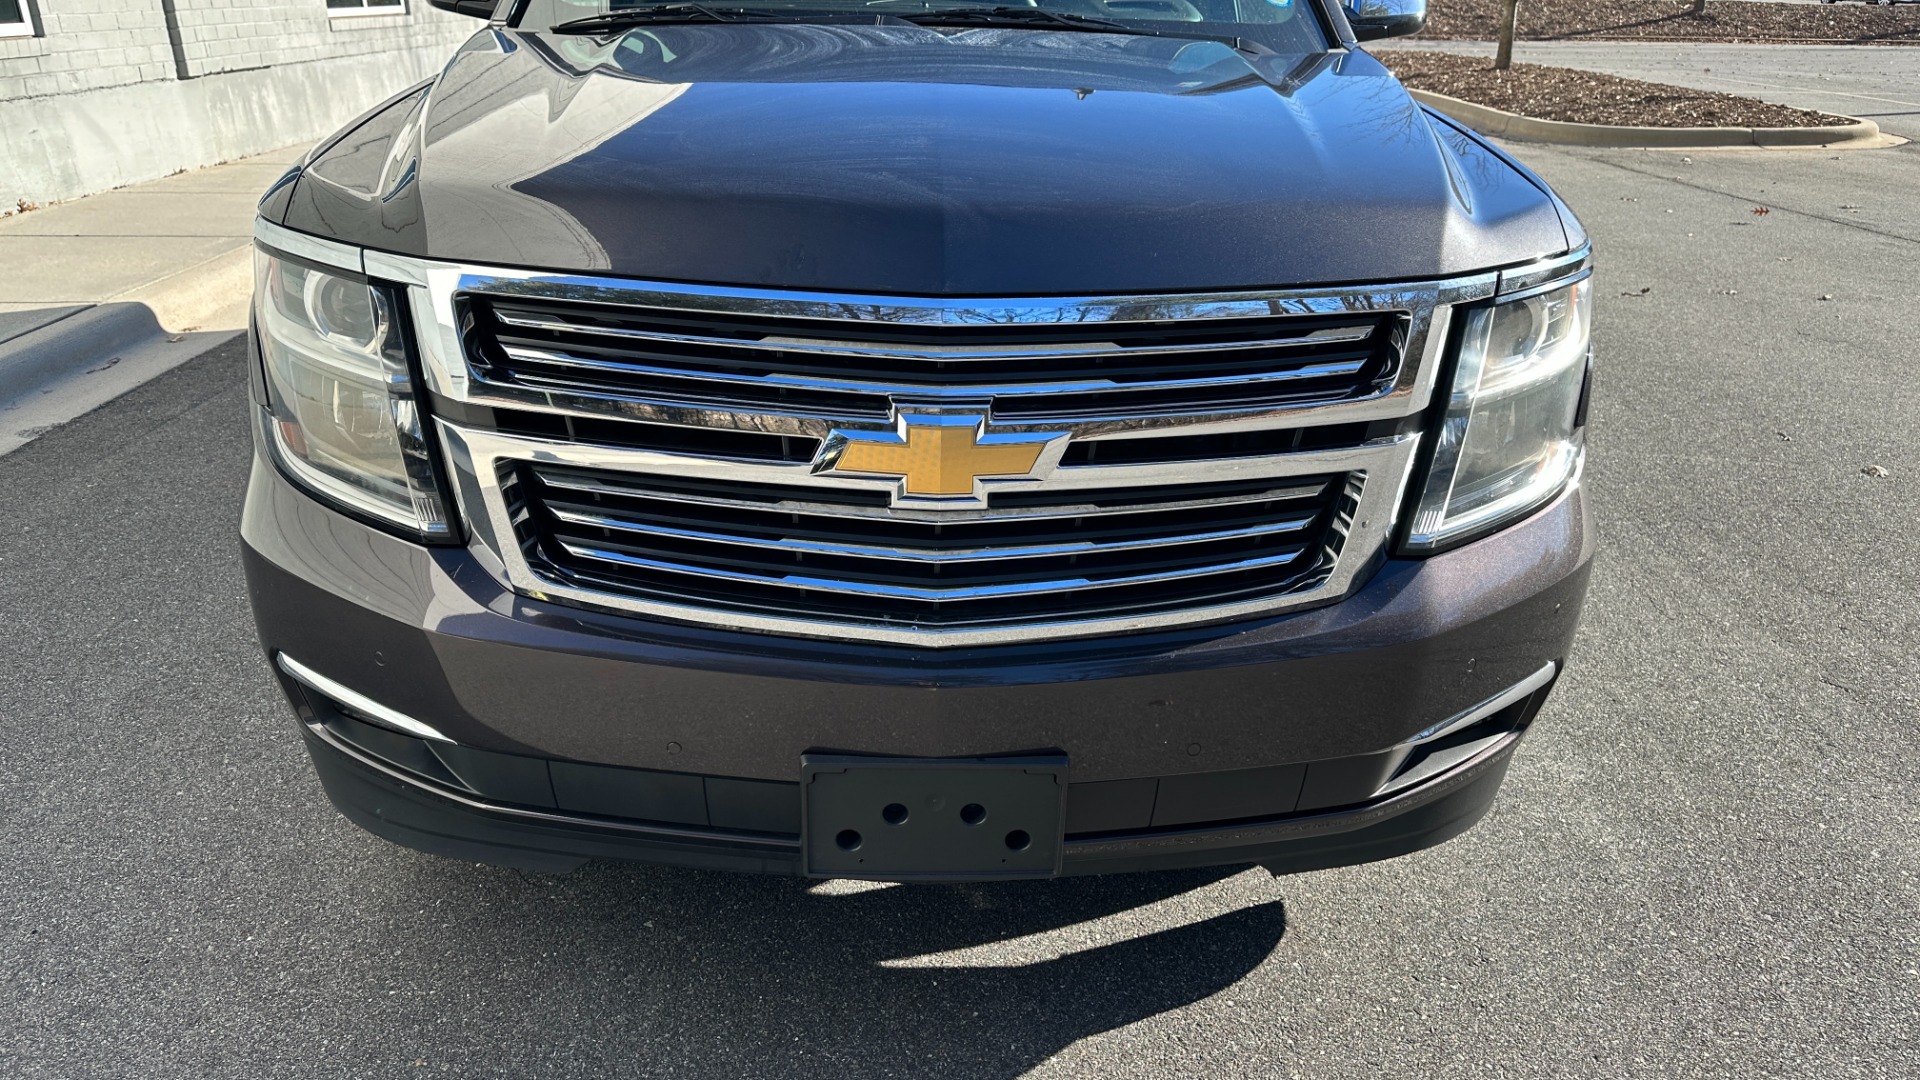 Used 2016 Chevrolet Tahoe LTZ / NAVIGATION / LEATHER / 4WD / 22IN WHEELS / REAR ENTERTAINMENT for sale $38,500 at Formula Imports in Charlotte NC 28227 9